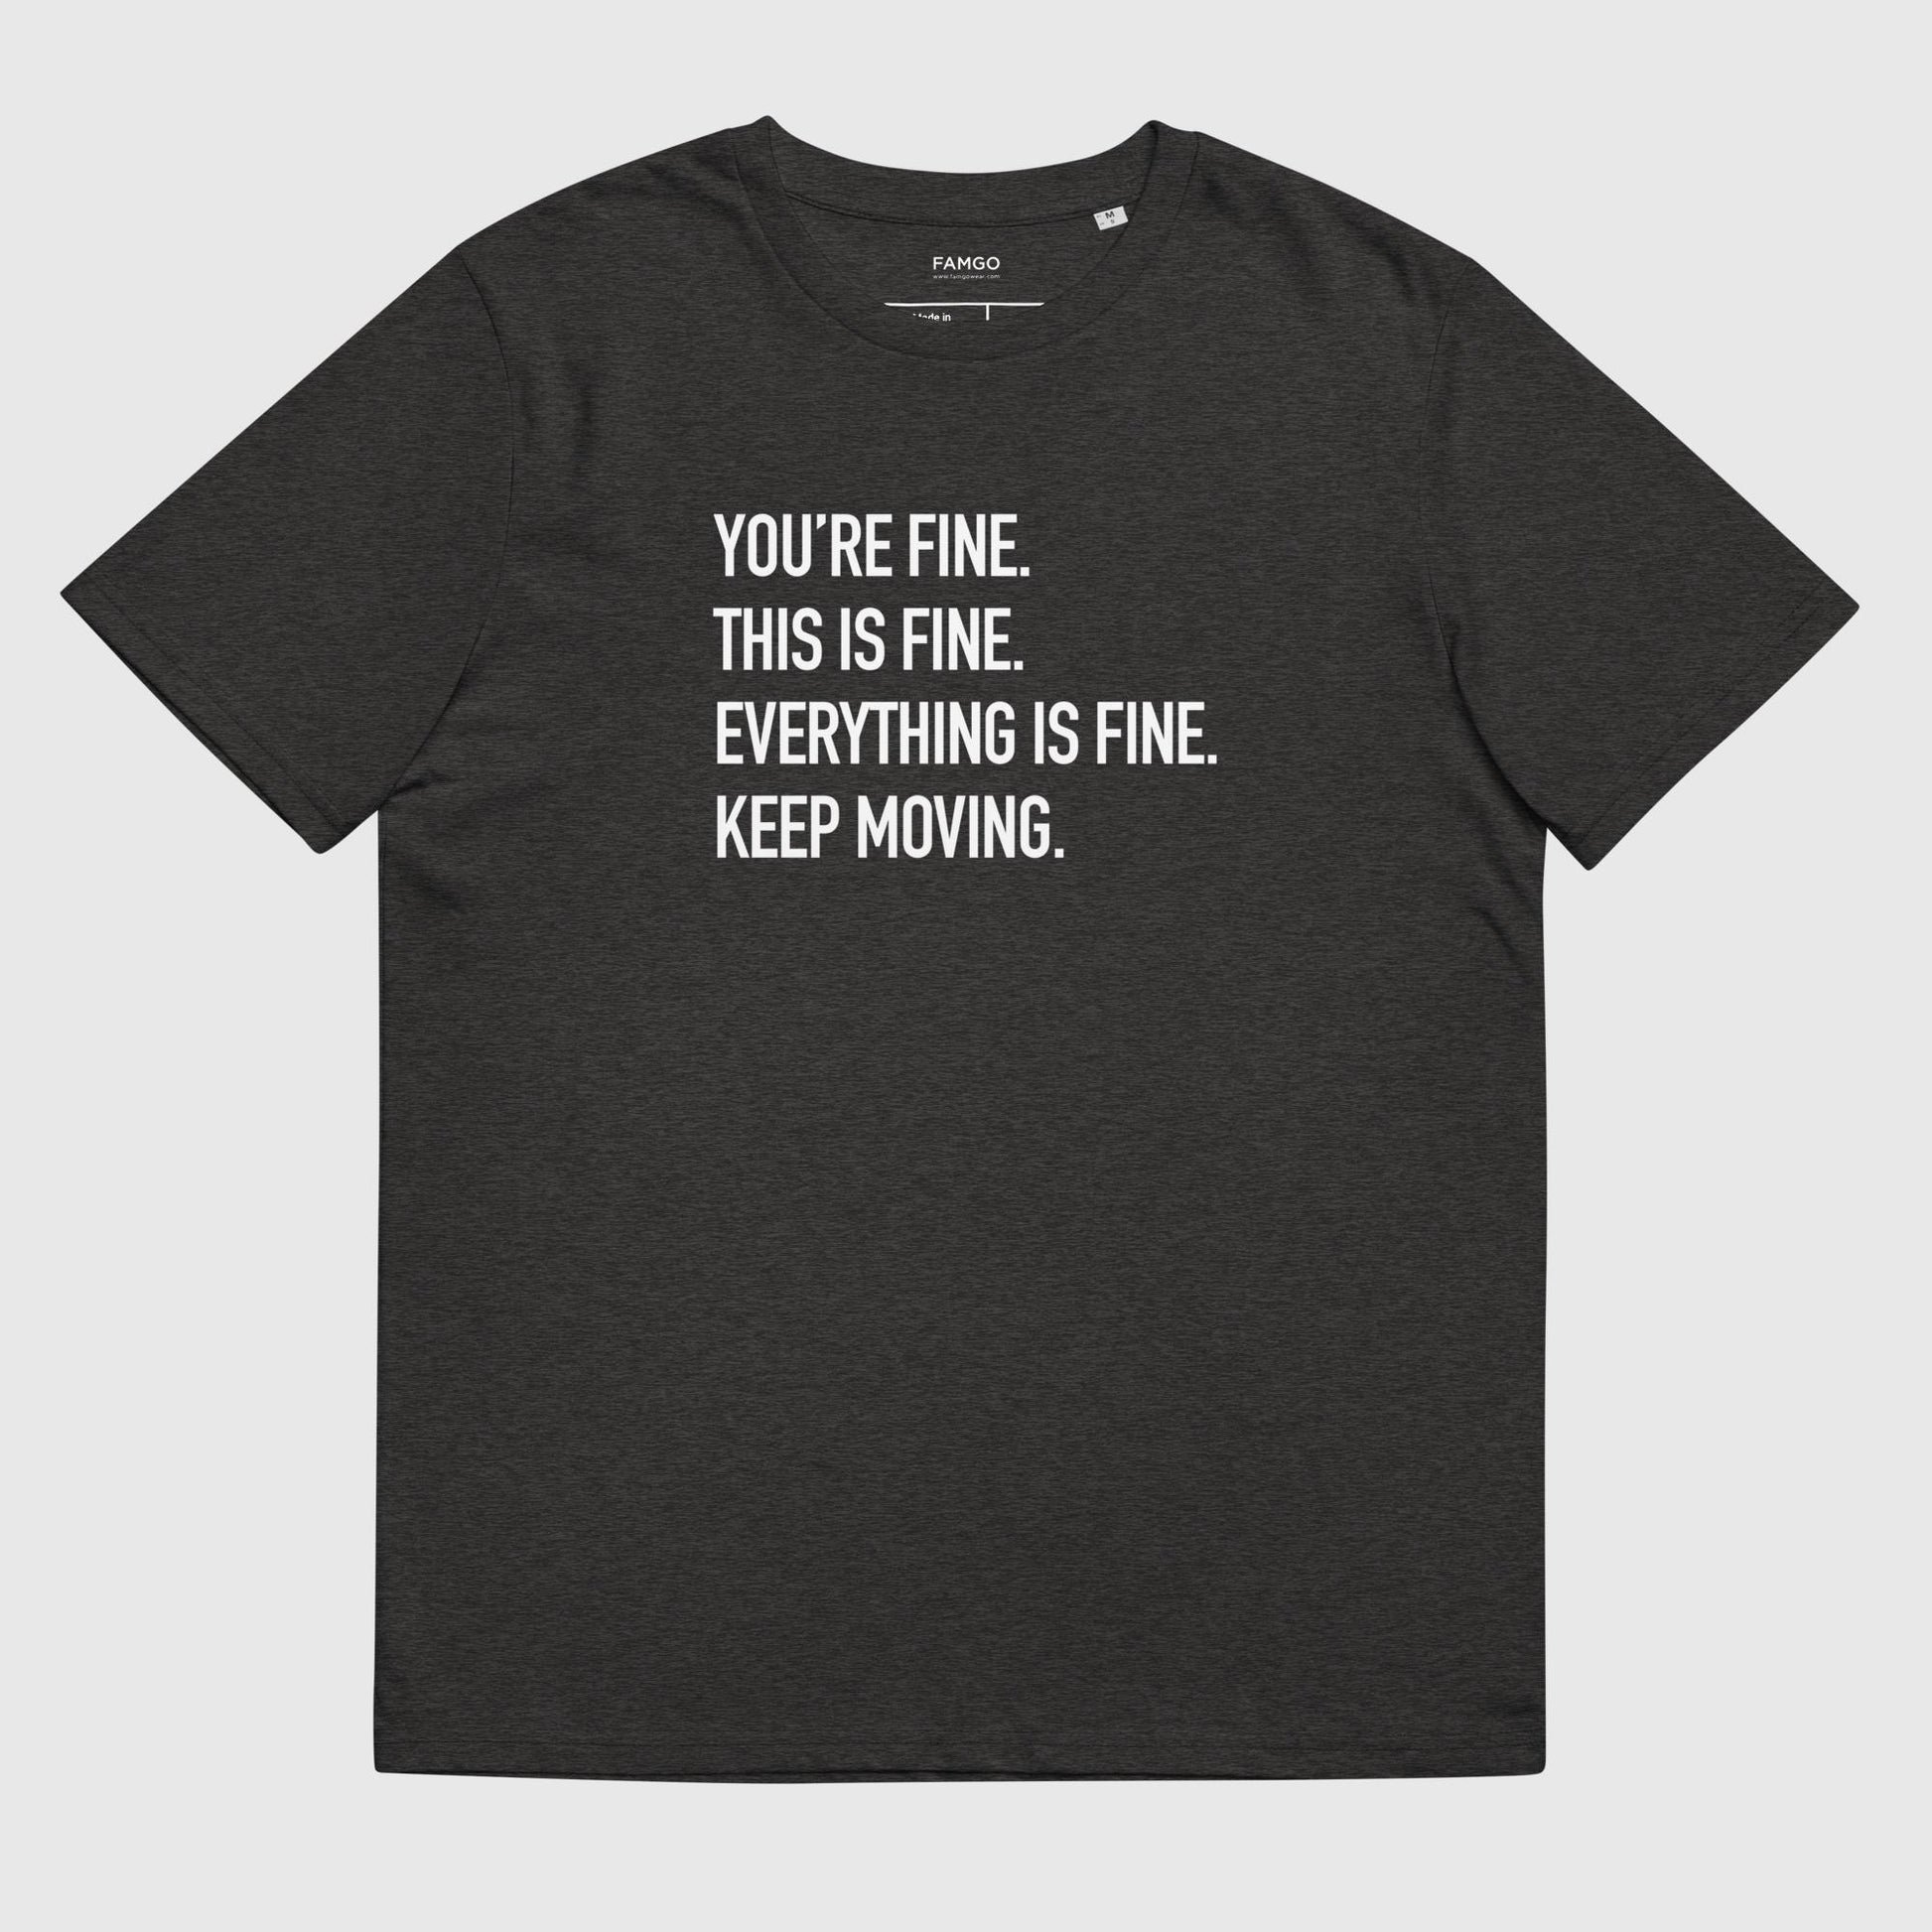 Men's dark heather gray organic cotton t-shirt that features Courtney Dauwalter's mantra, "You're fine. This is fine. Everything is fine. Keep moving."